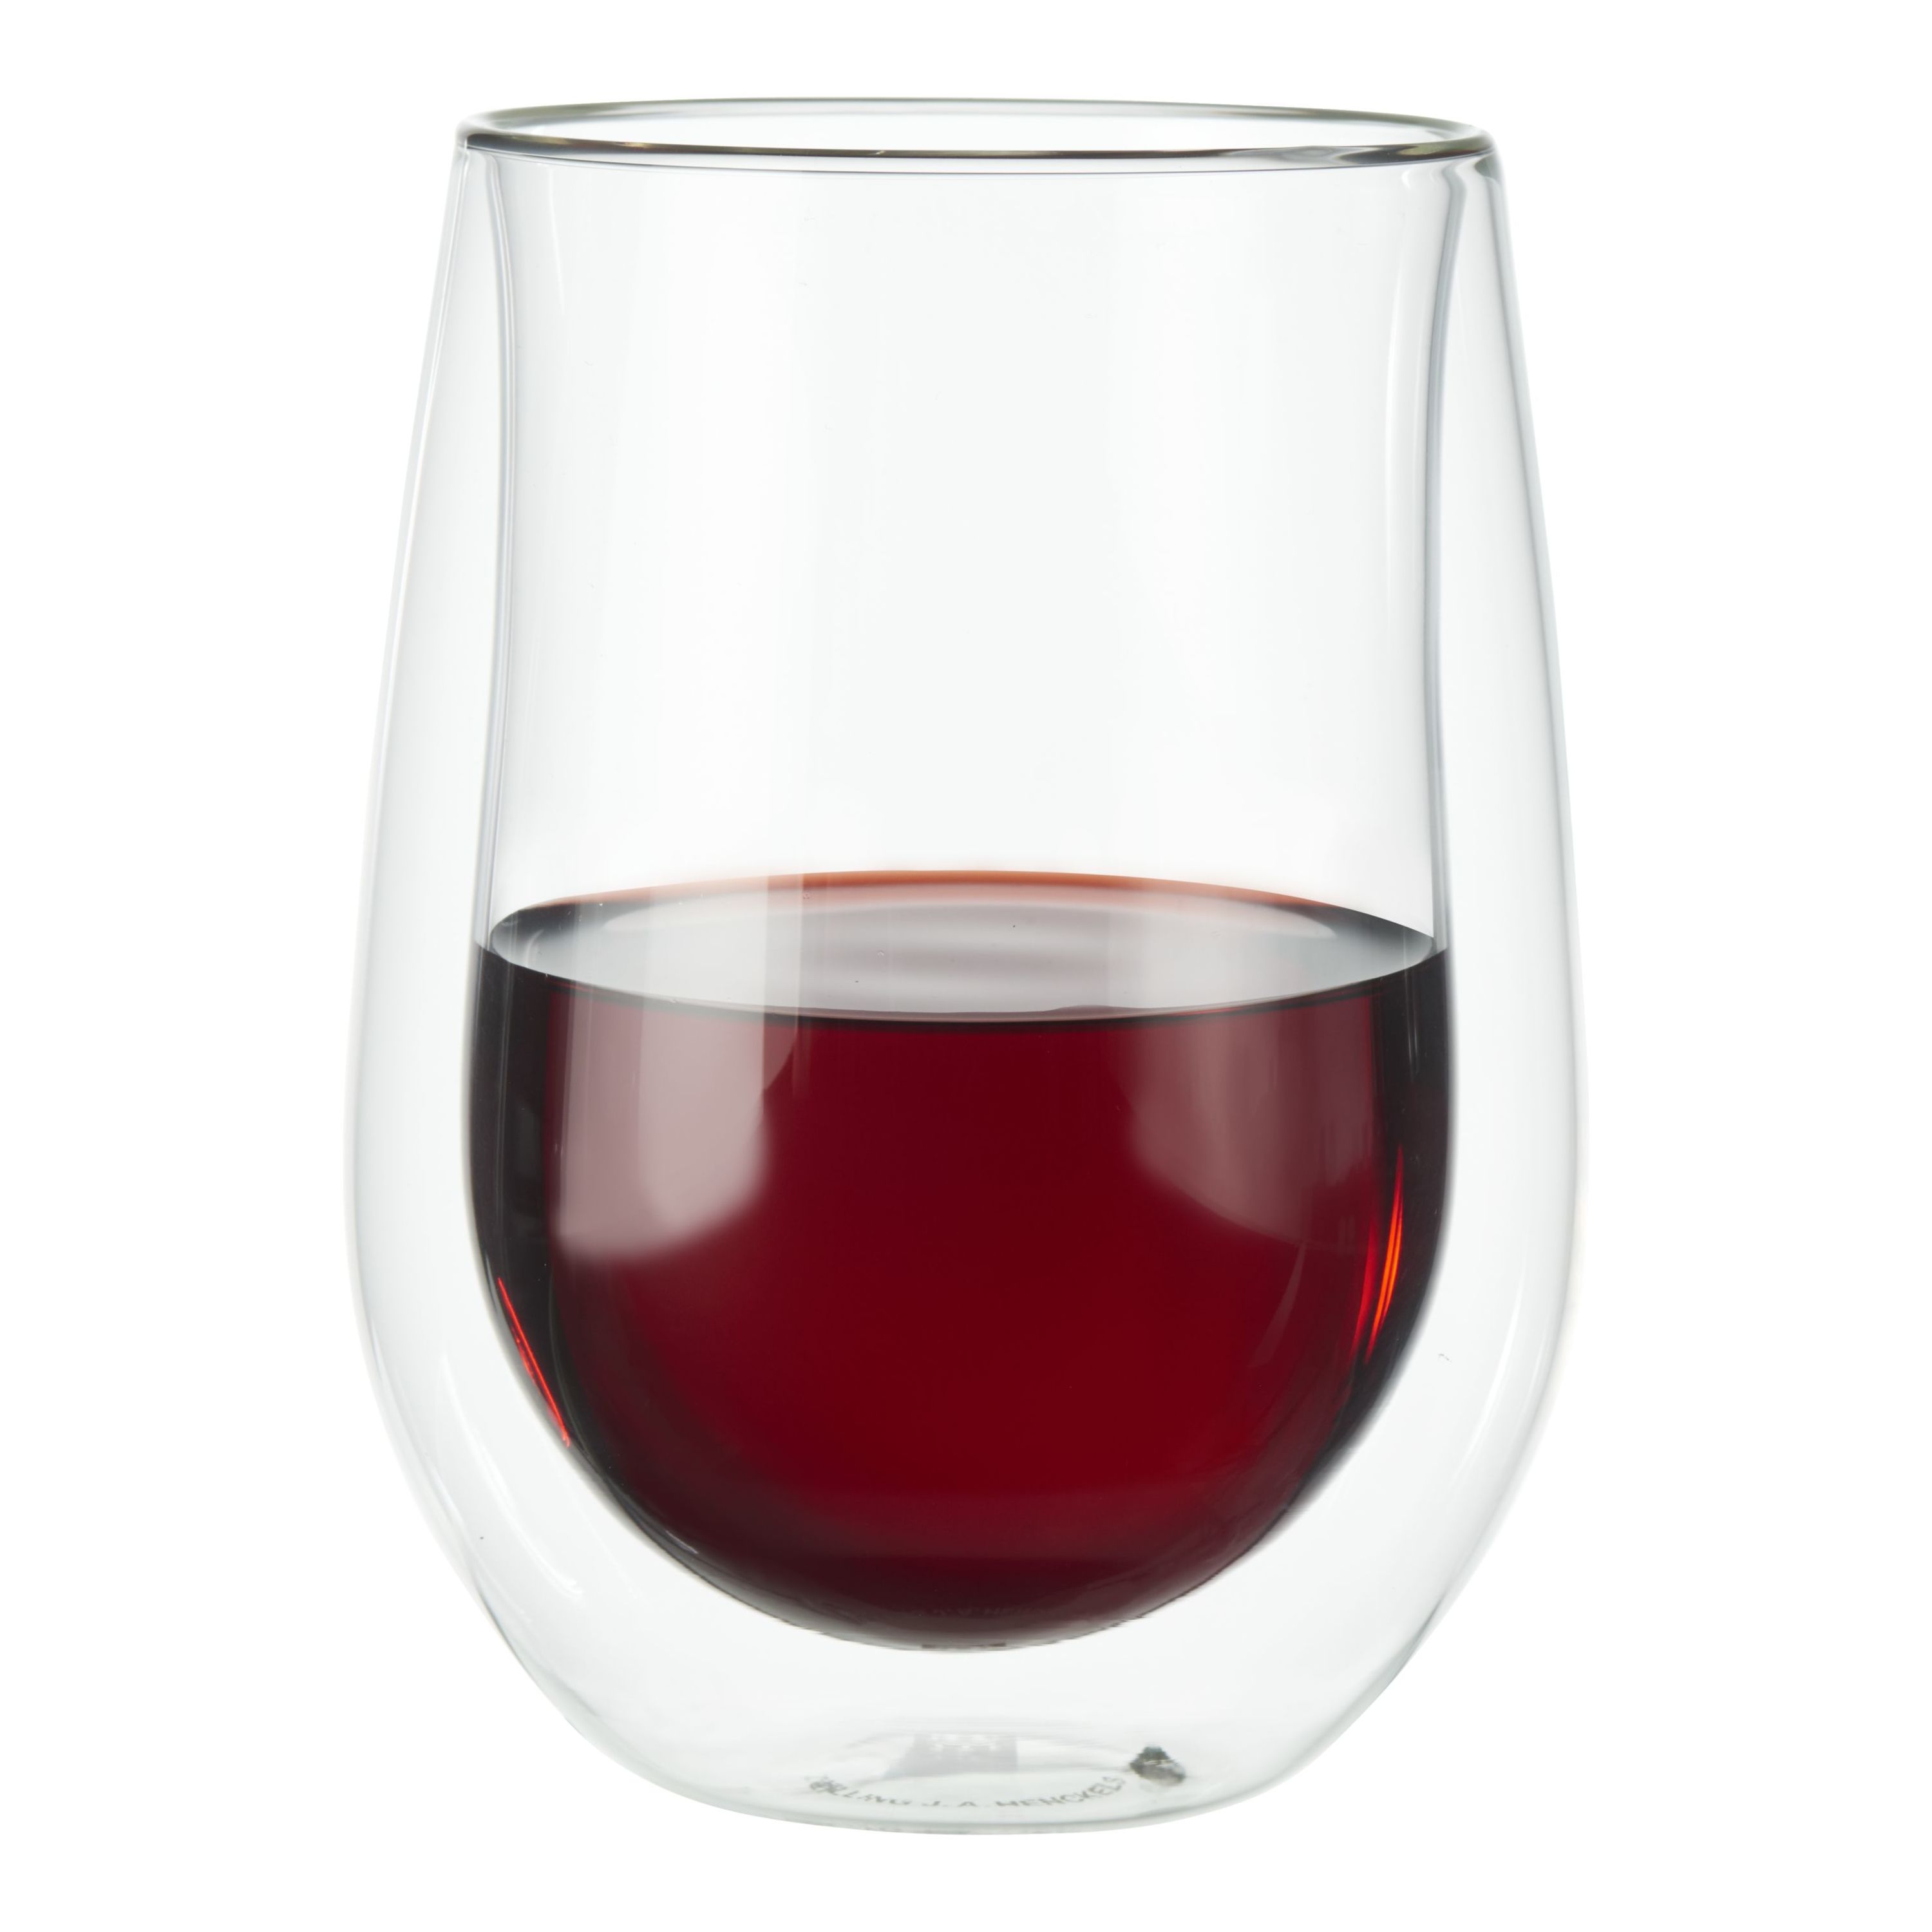 ZWILLING Sorrento Double Wall Glassware 12-oz / 2-pc Stemless red wine  glass set